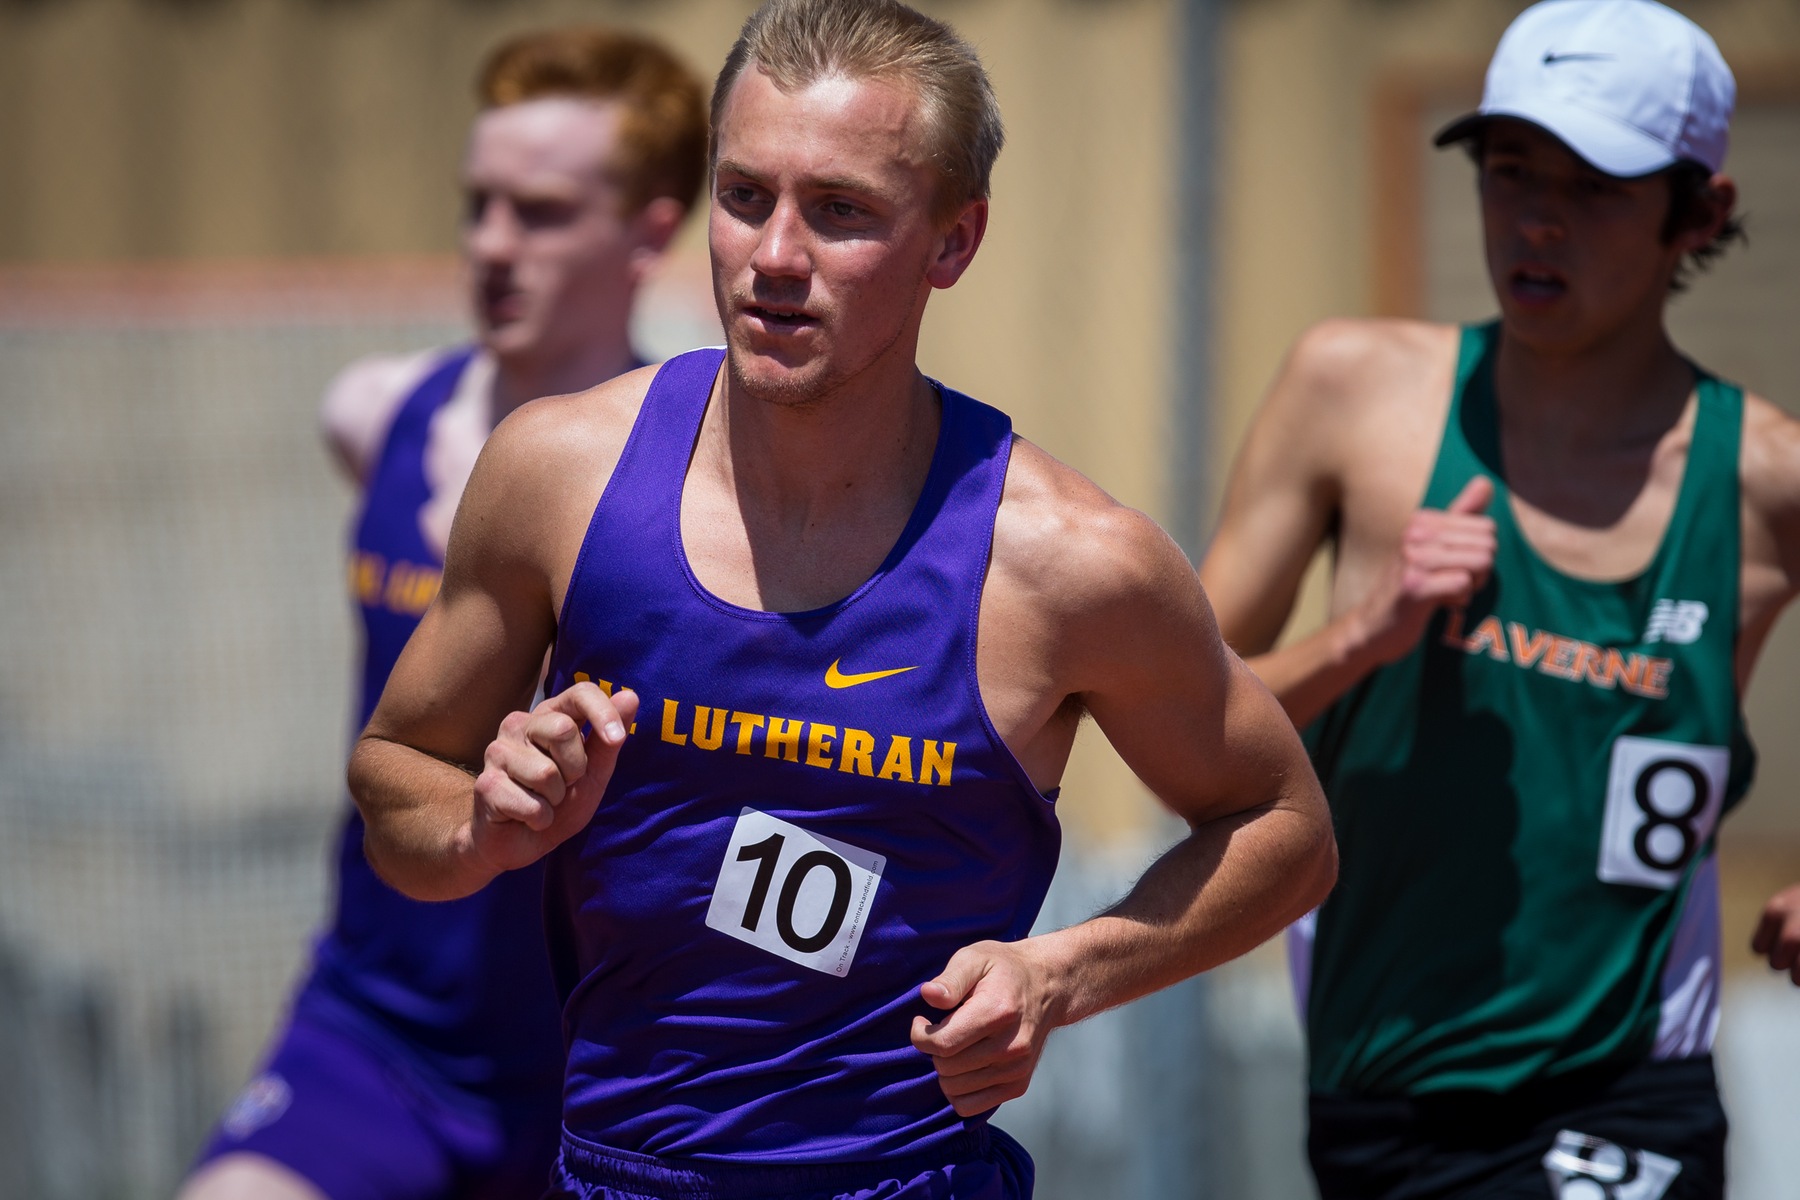 Kingsmen Record Seven Top Ten Finishes on Day Two